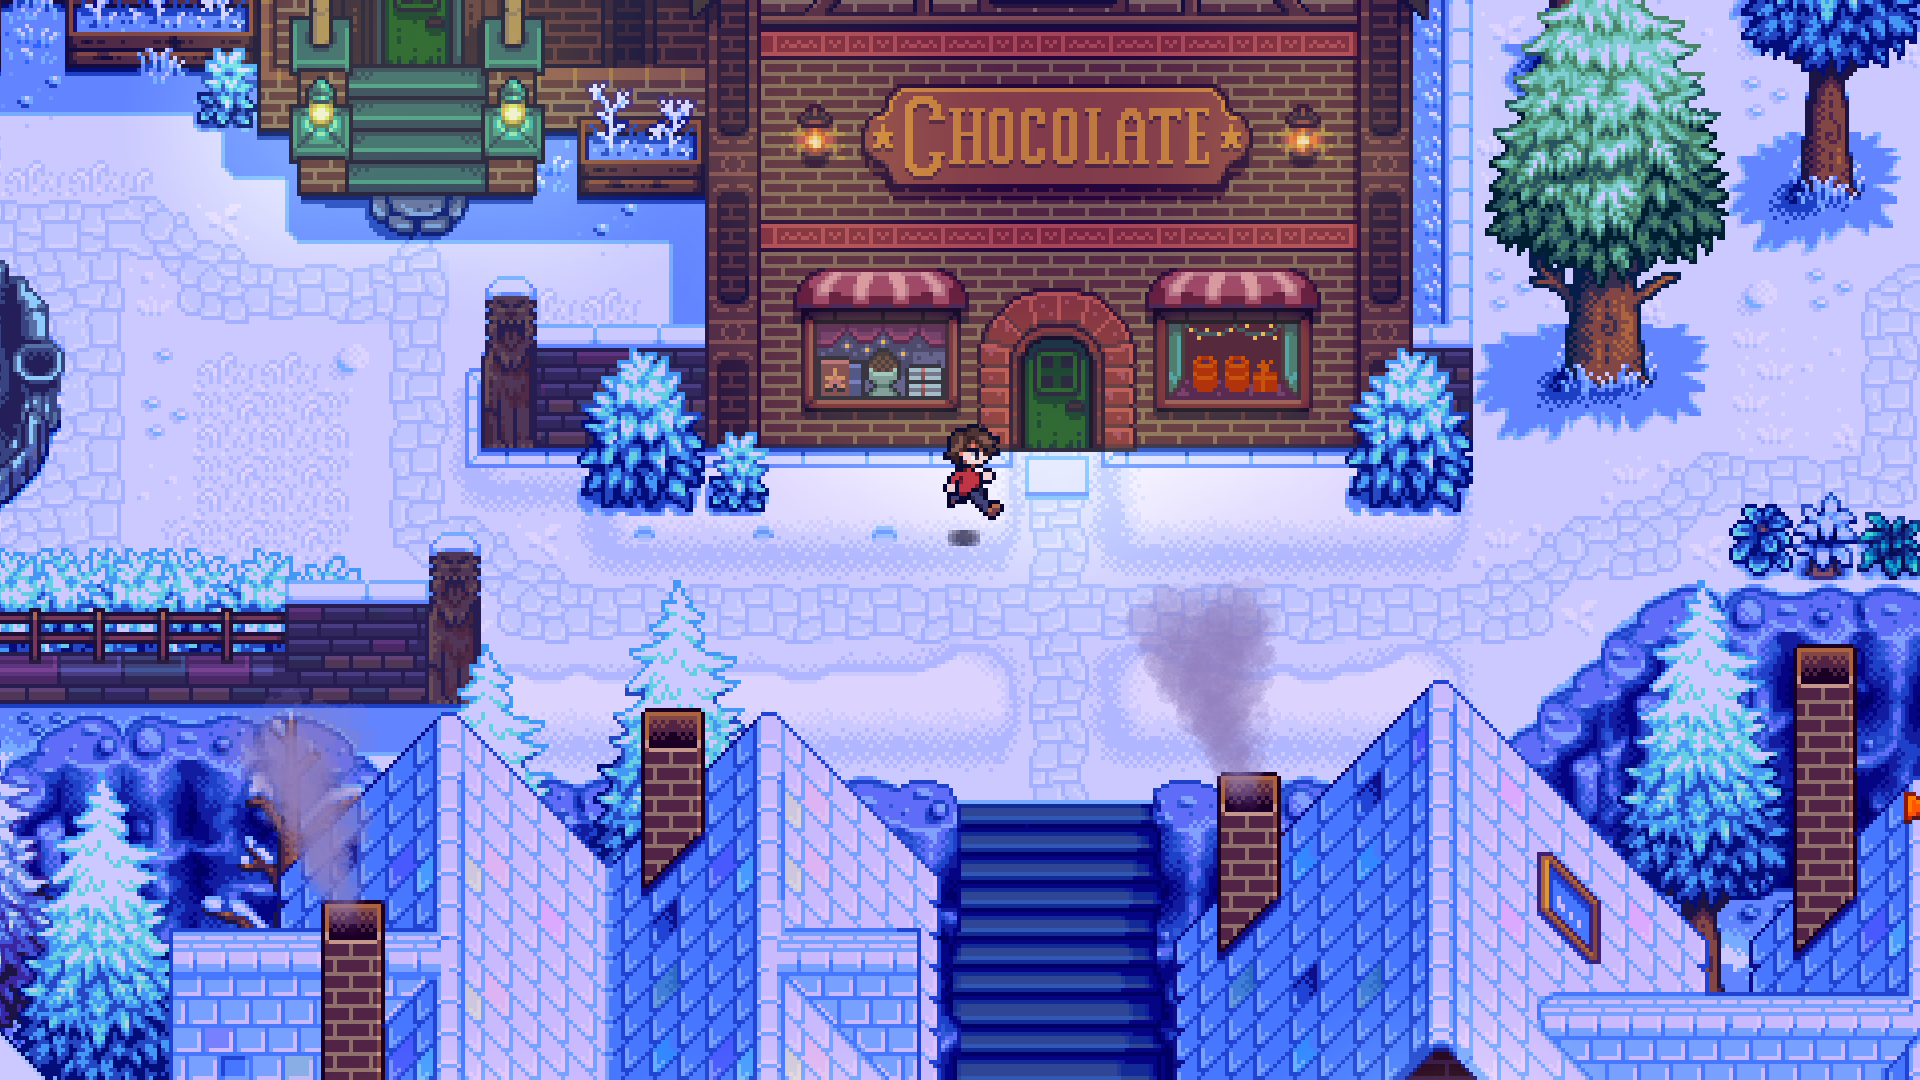 A character runs in front of a chocolate shop in Stardew creator Eric "ConcernedApe" Barone's upcoming game, Haunted Chocolatier.